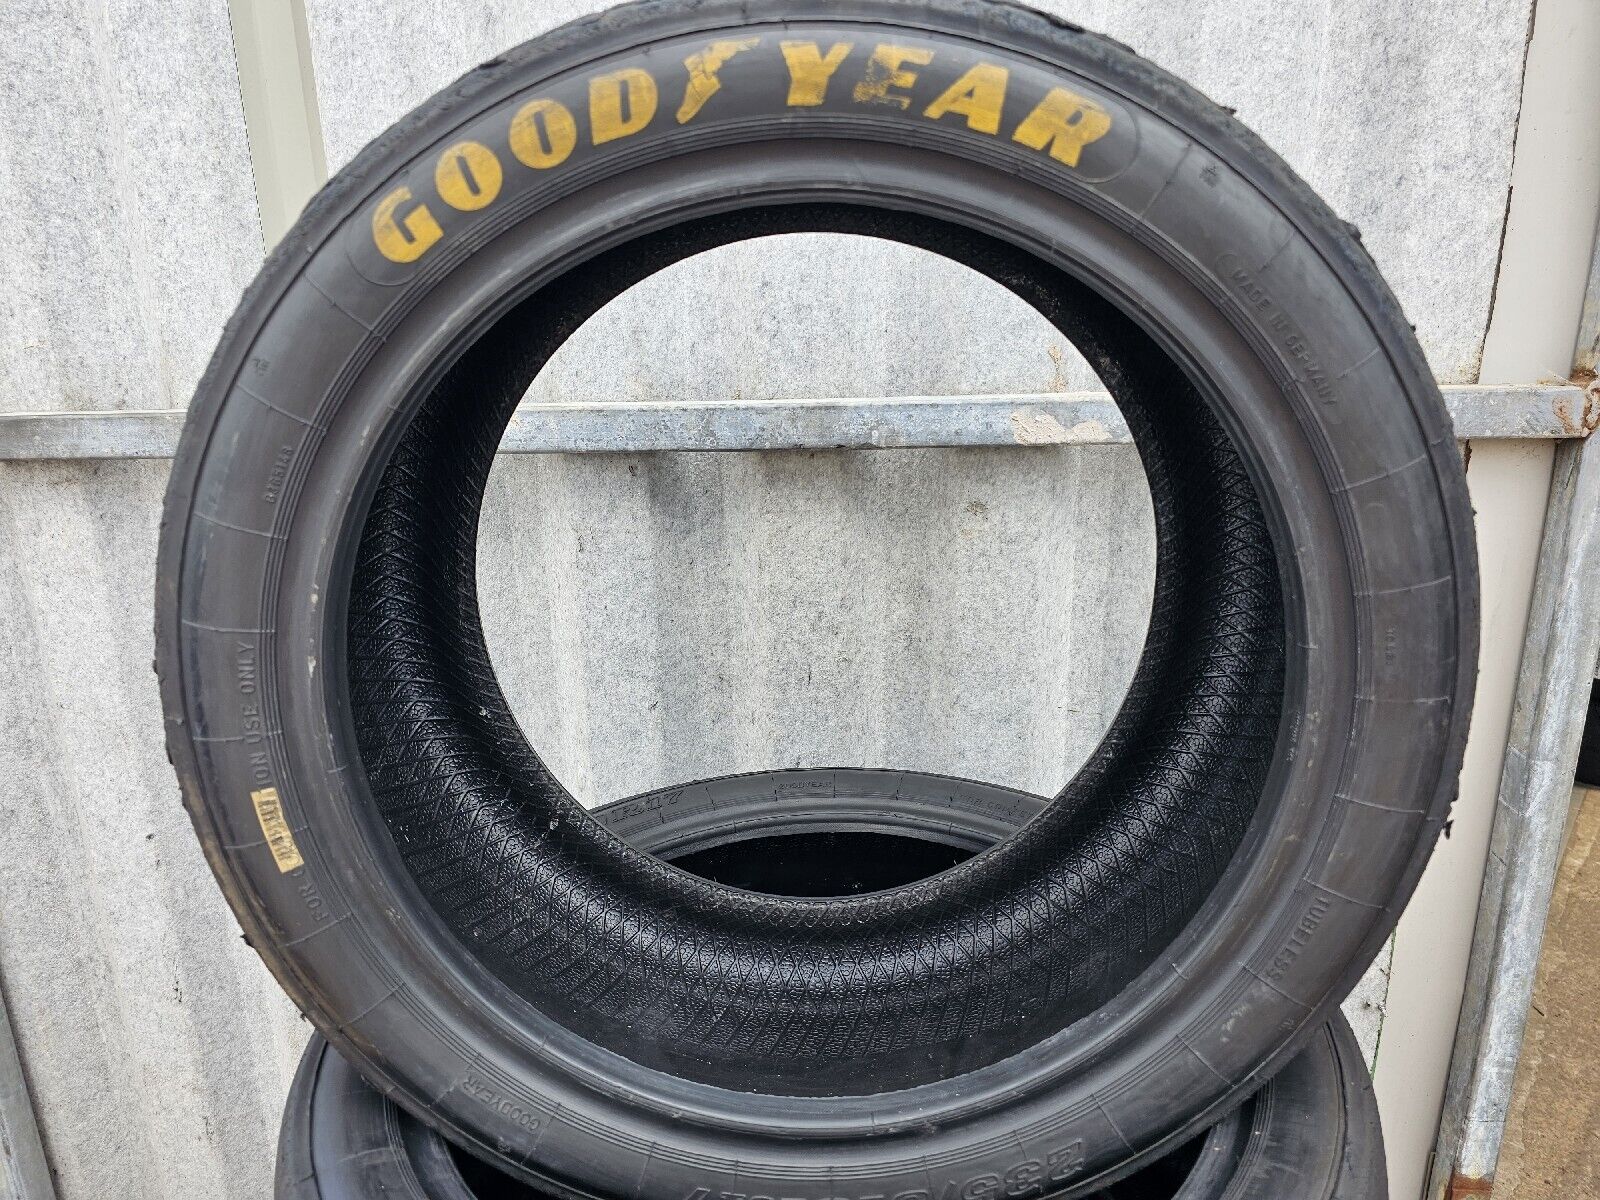 x1 Goodyear 235/610R17 Racing Slick Tyre Race Track Day Dunlop 235/40R17 Inch